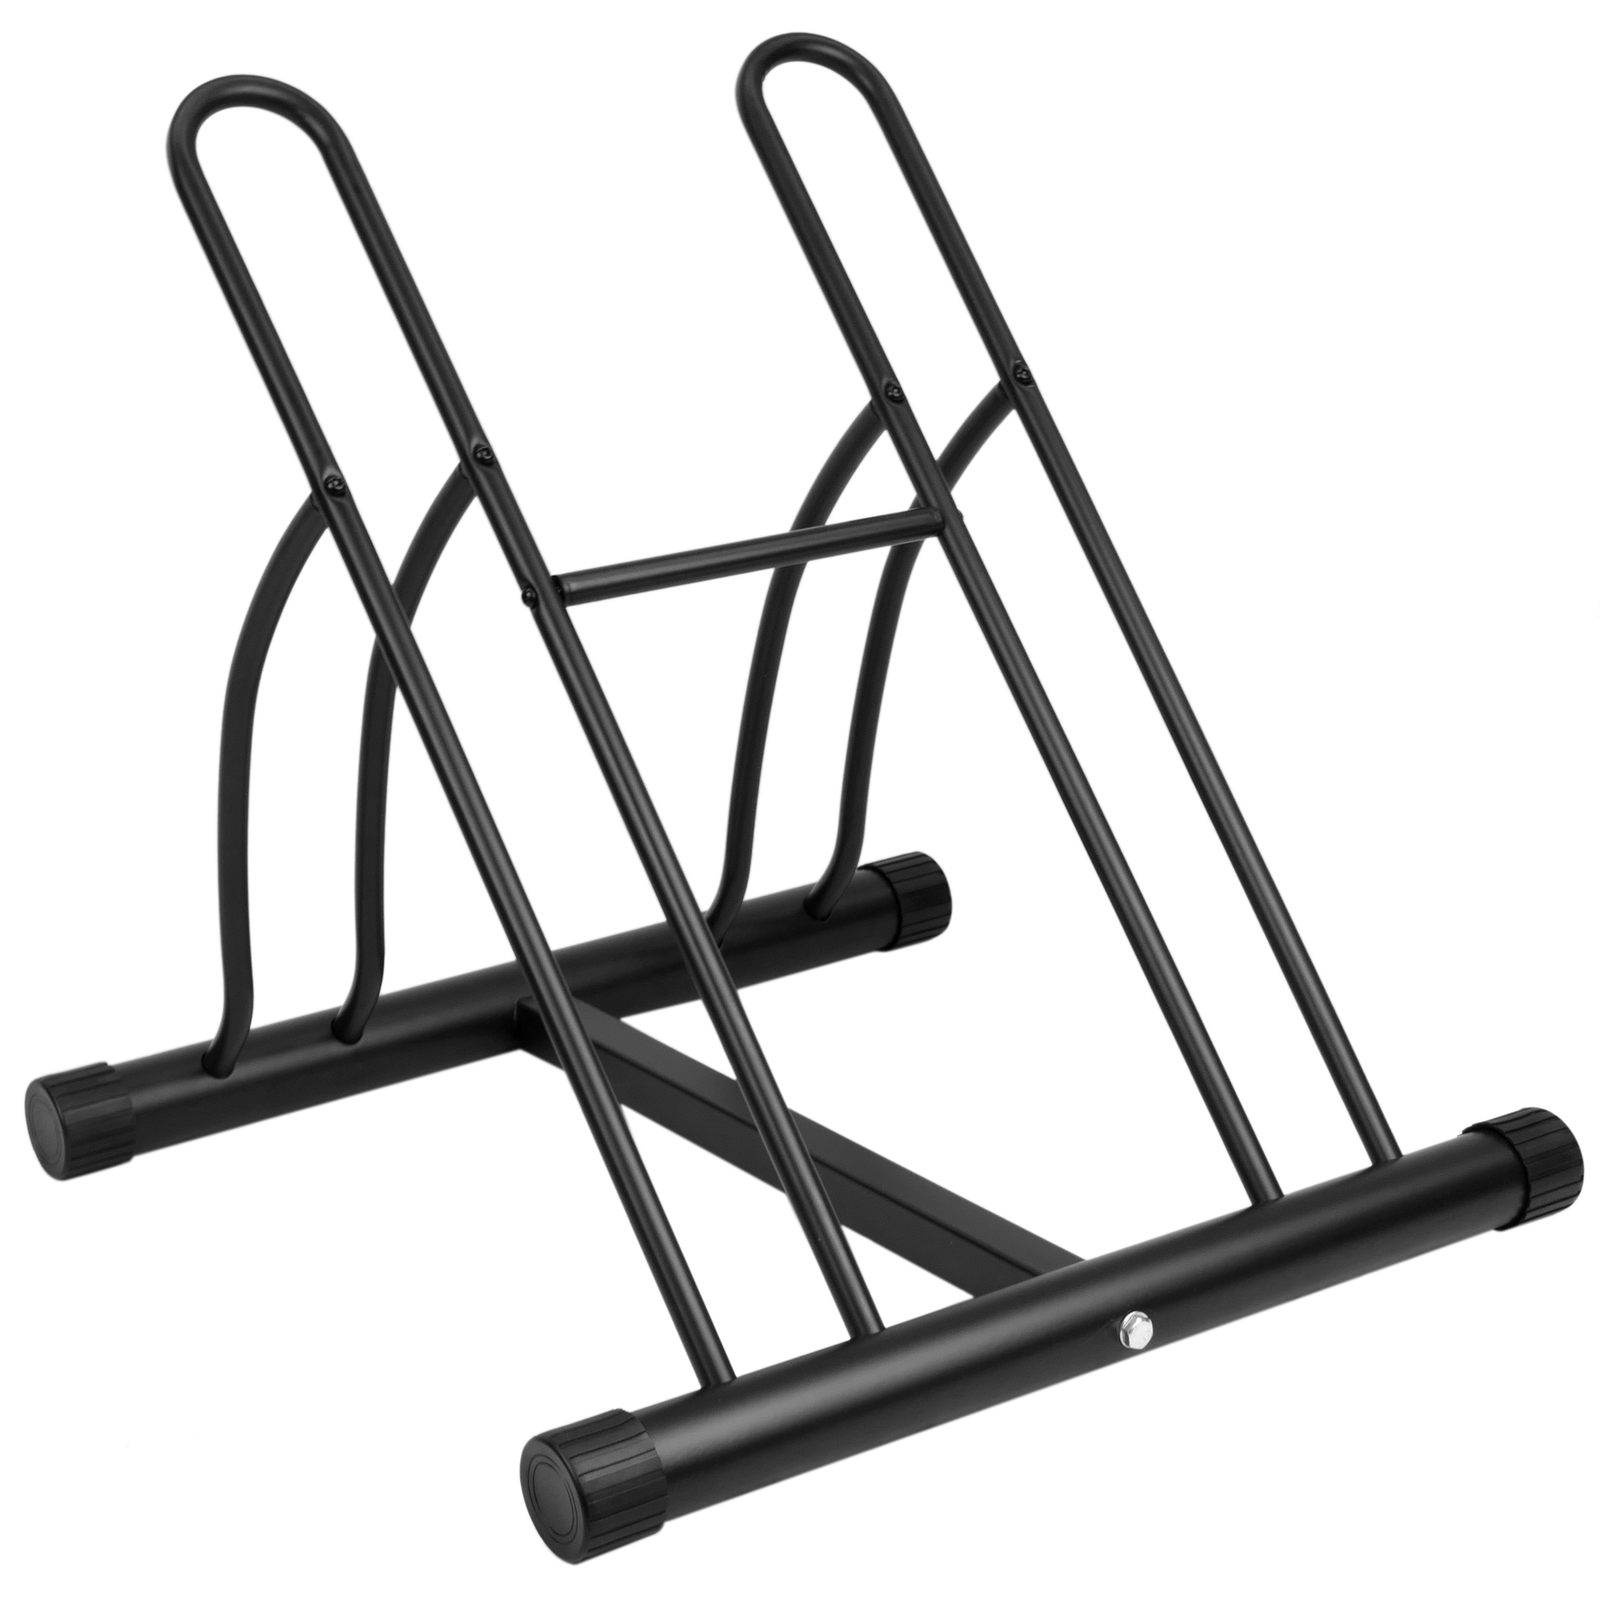 Almabner Bicycle Floor Type Parking Rack Stand,Child Balance Car Parking Rack Stand,Non Slip Fixed Support Scooter Parking Rack 